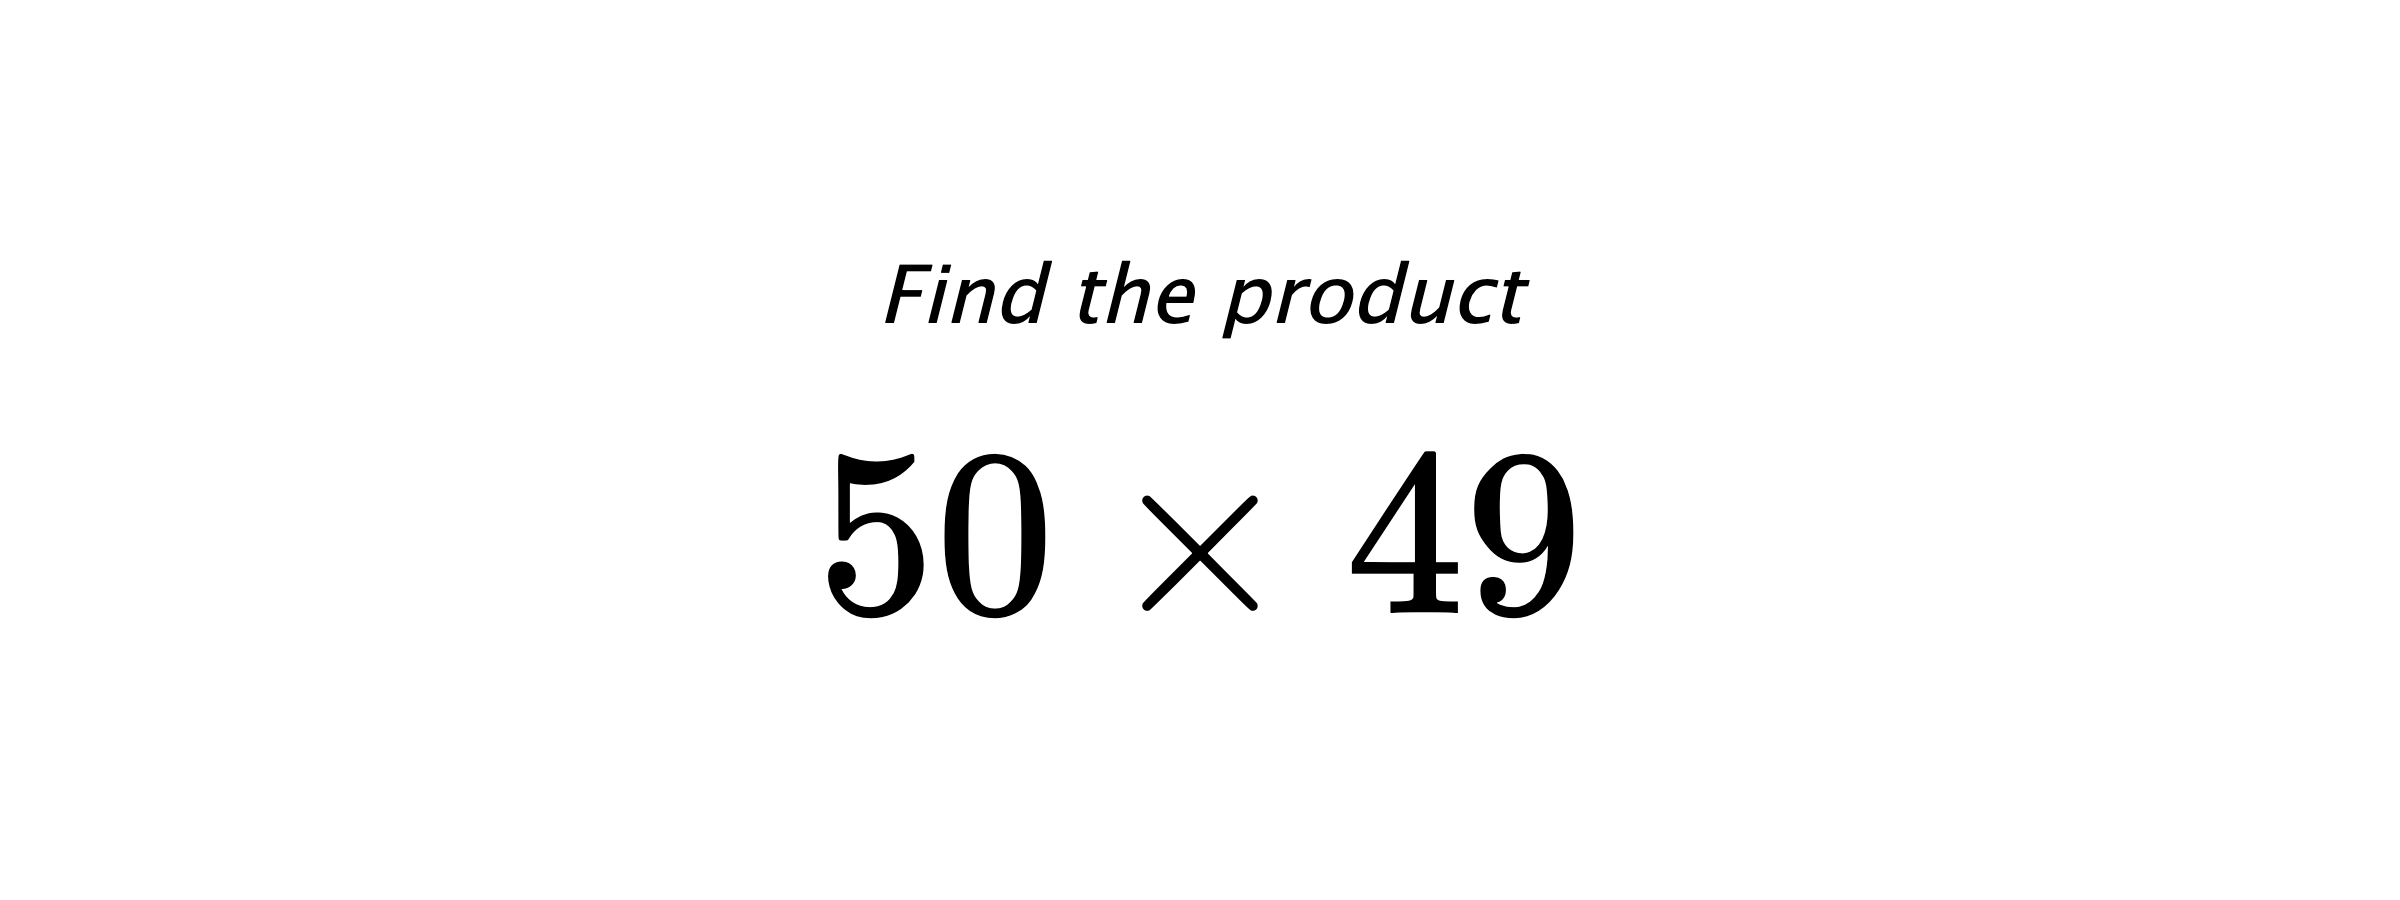 Find the product $ 50 \times 49 $